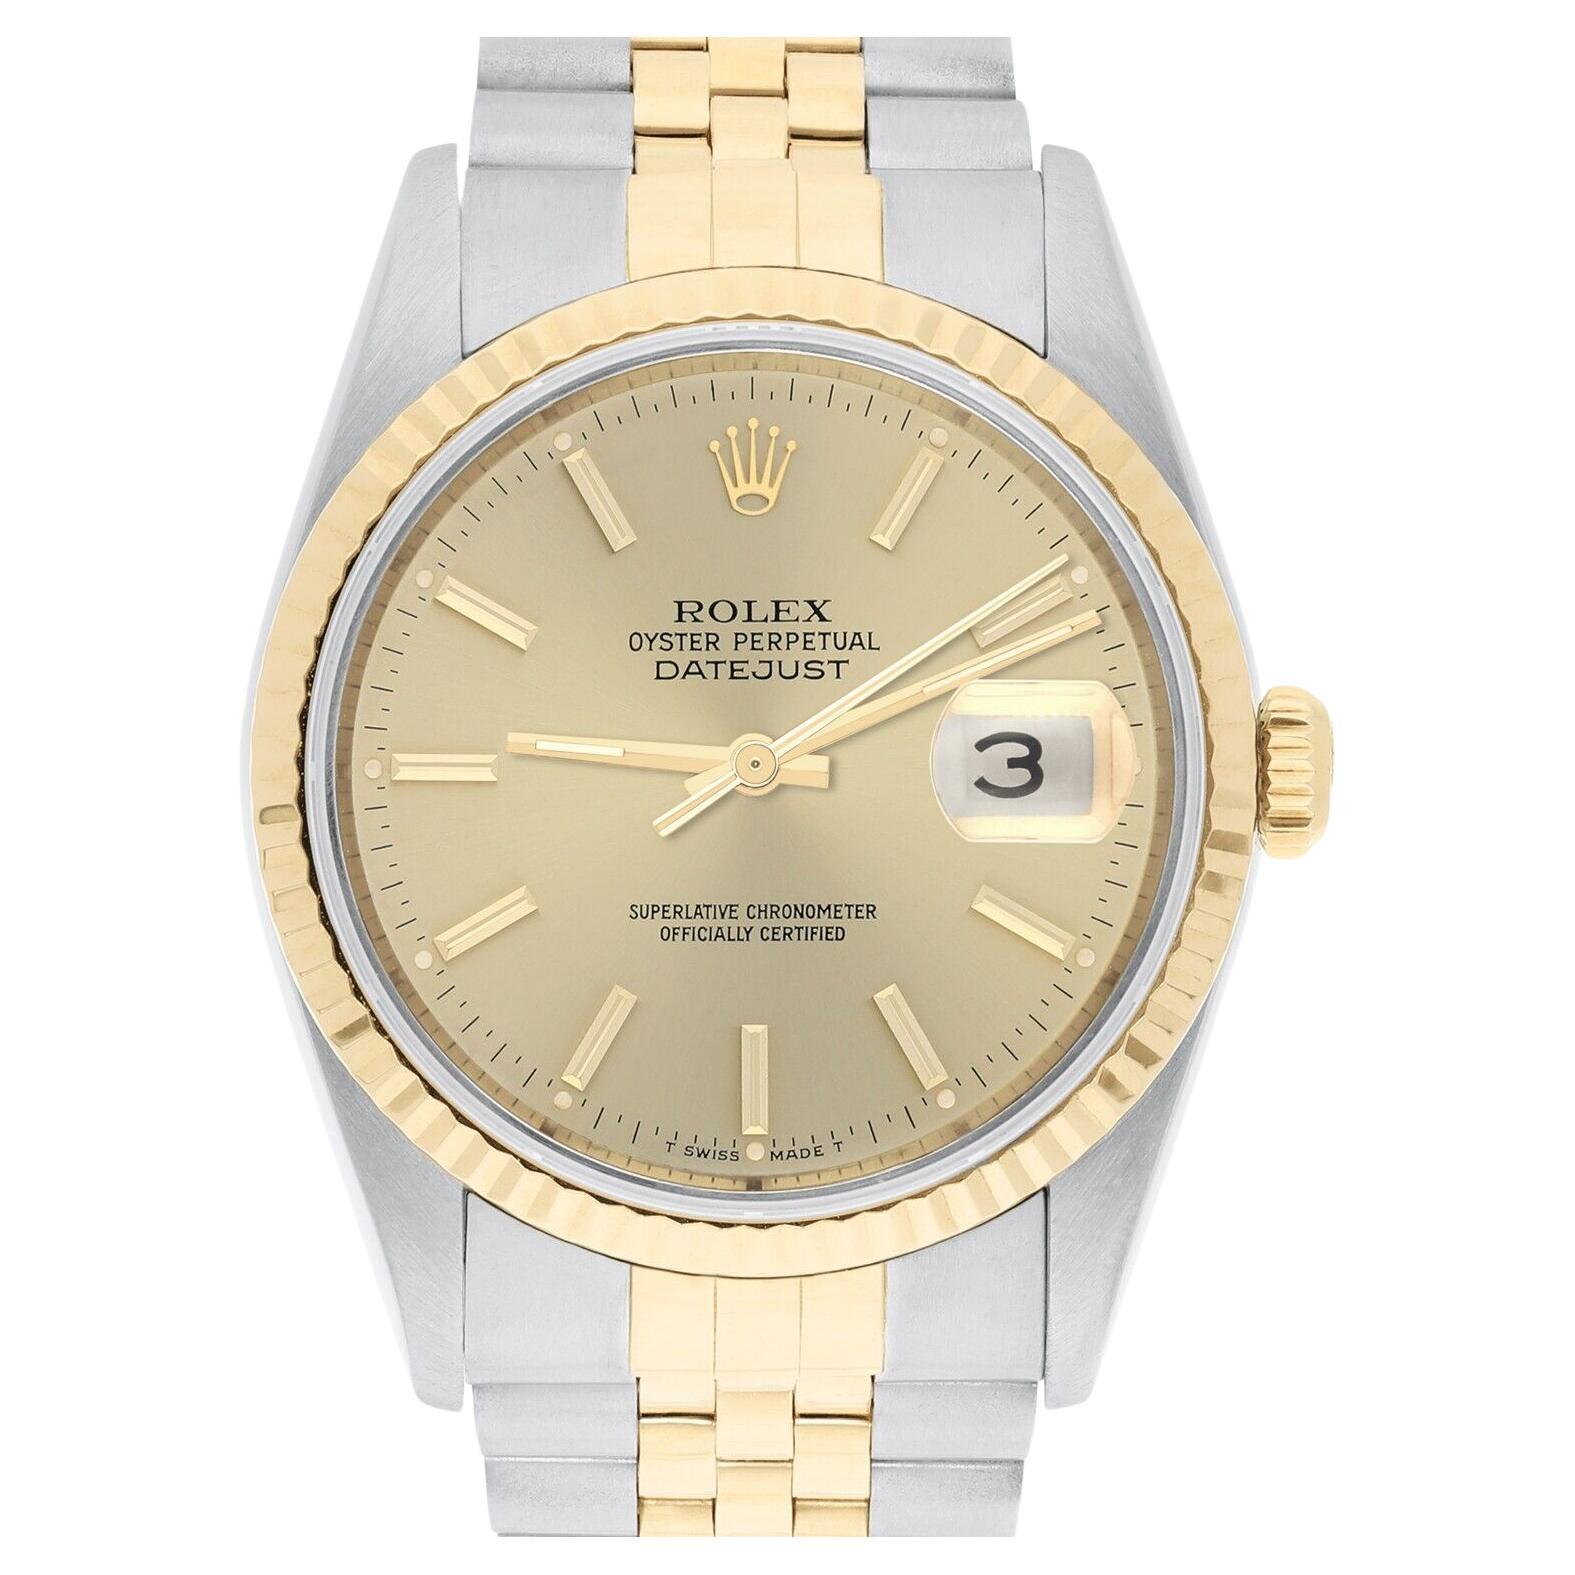 Rolex Datejust 36mm Two Tone Champagne Index Dial Jubilee 16233 Circa 2000 en vente